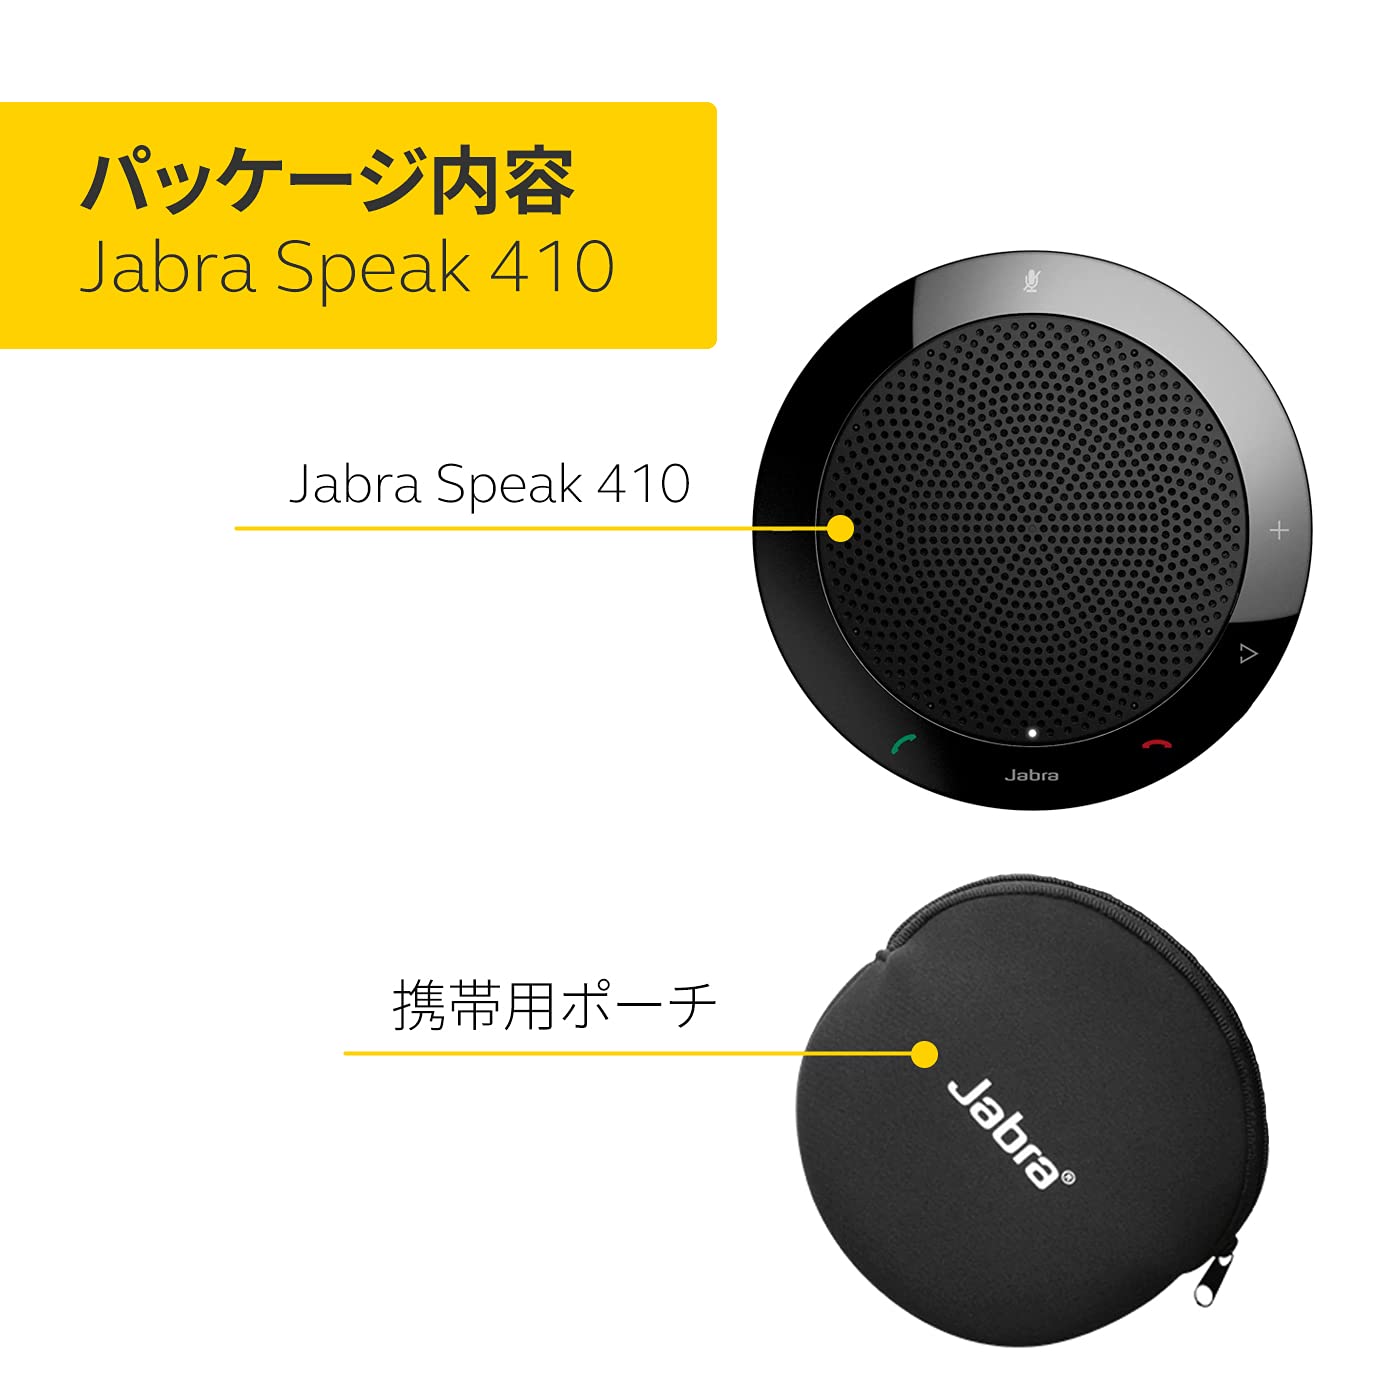 Jabra 7410-209 Model Speak 410 USB Speakerphone, Plug and Play Solution, Works with All PCs, Outstanding Sound Quality, Full Compatibility with UC Systems & VoIP Clients, LED Indicators